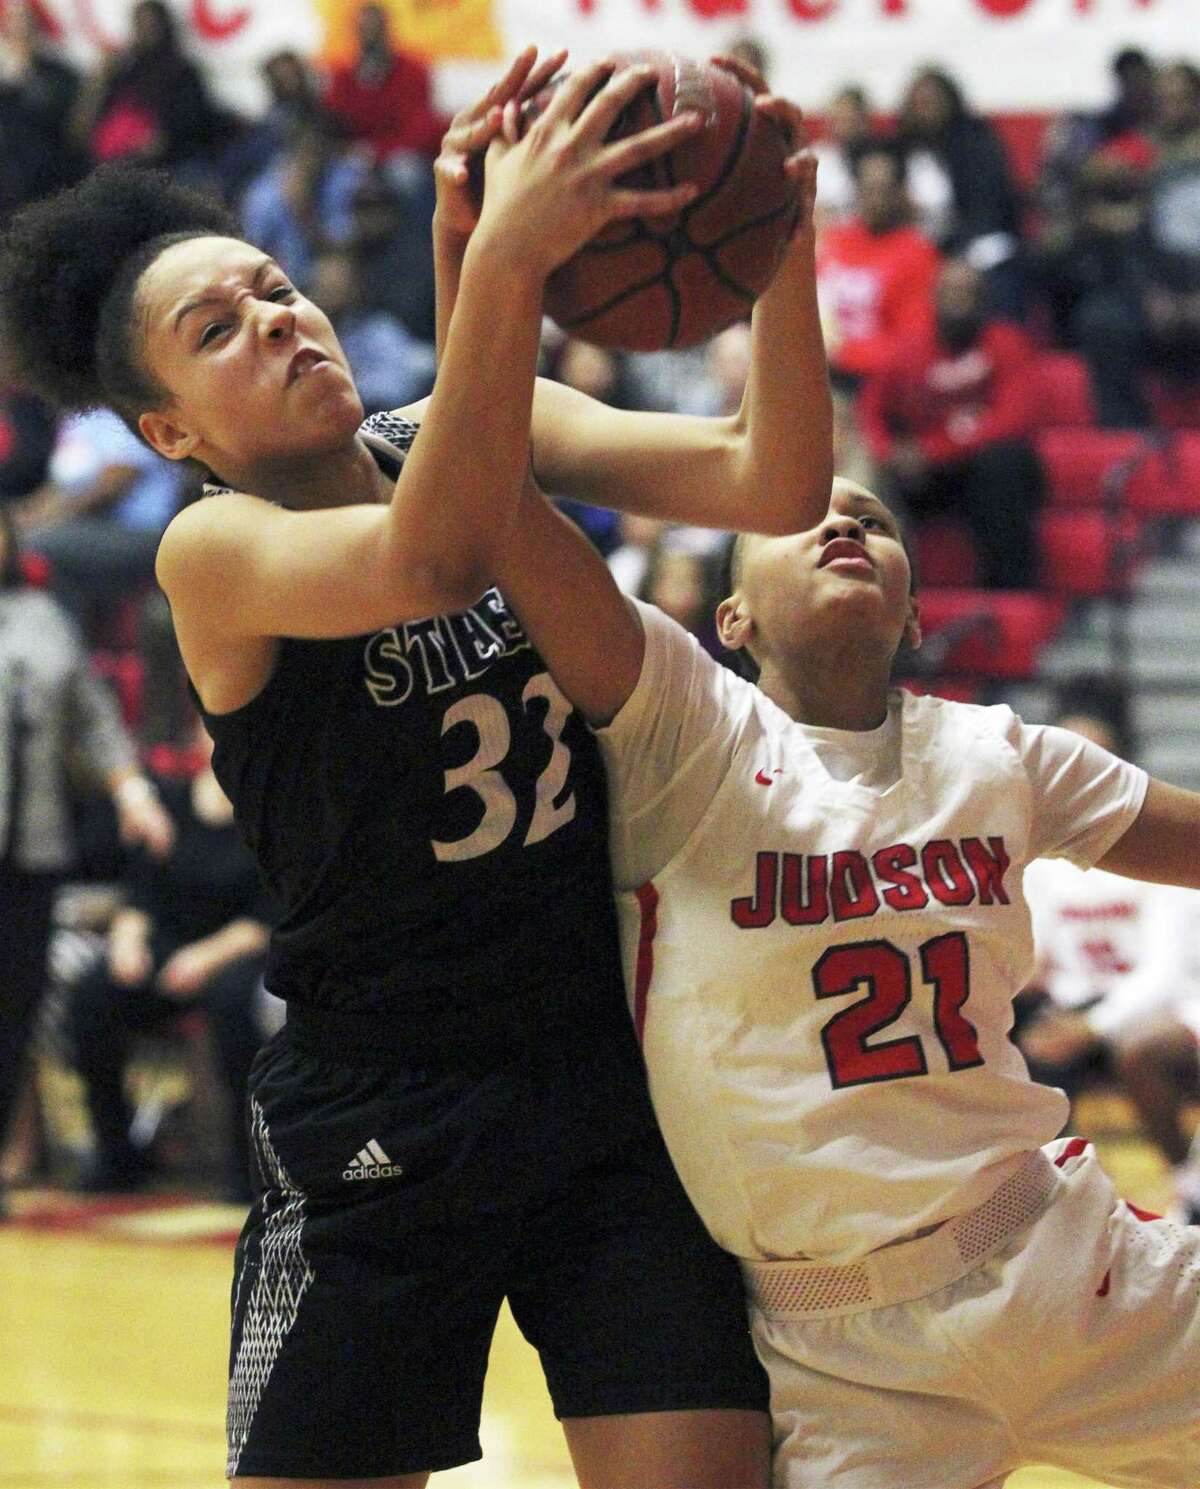 Steele's Sydney Cajero grabs a rebound over Tiffany McGarity as Judson hosts Steele in girls basketball at Judson High School gym on January 22, 2019.